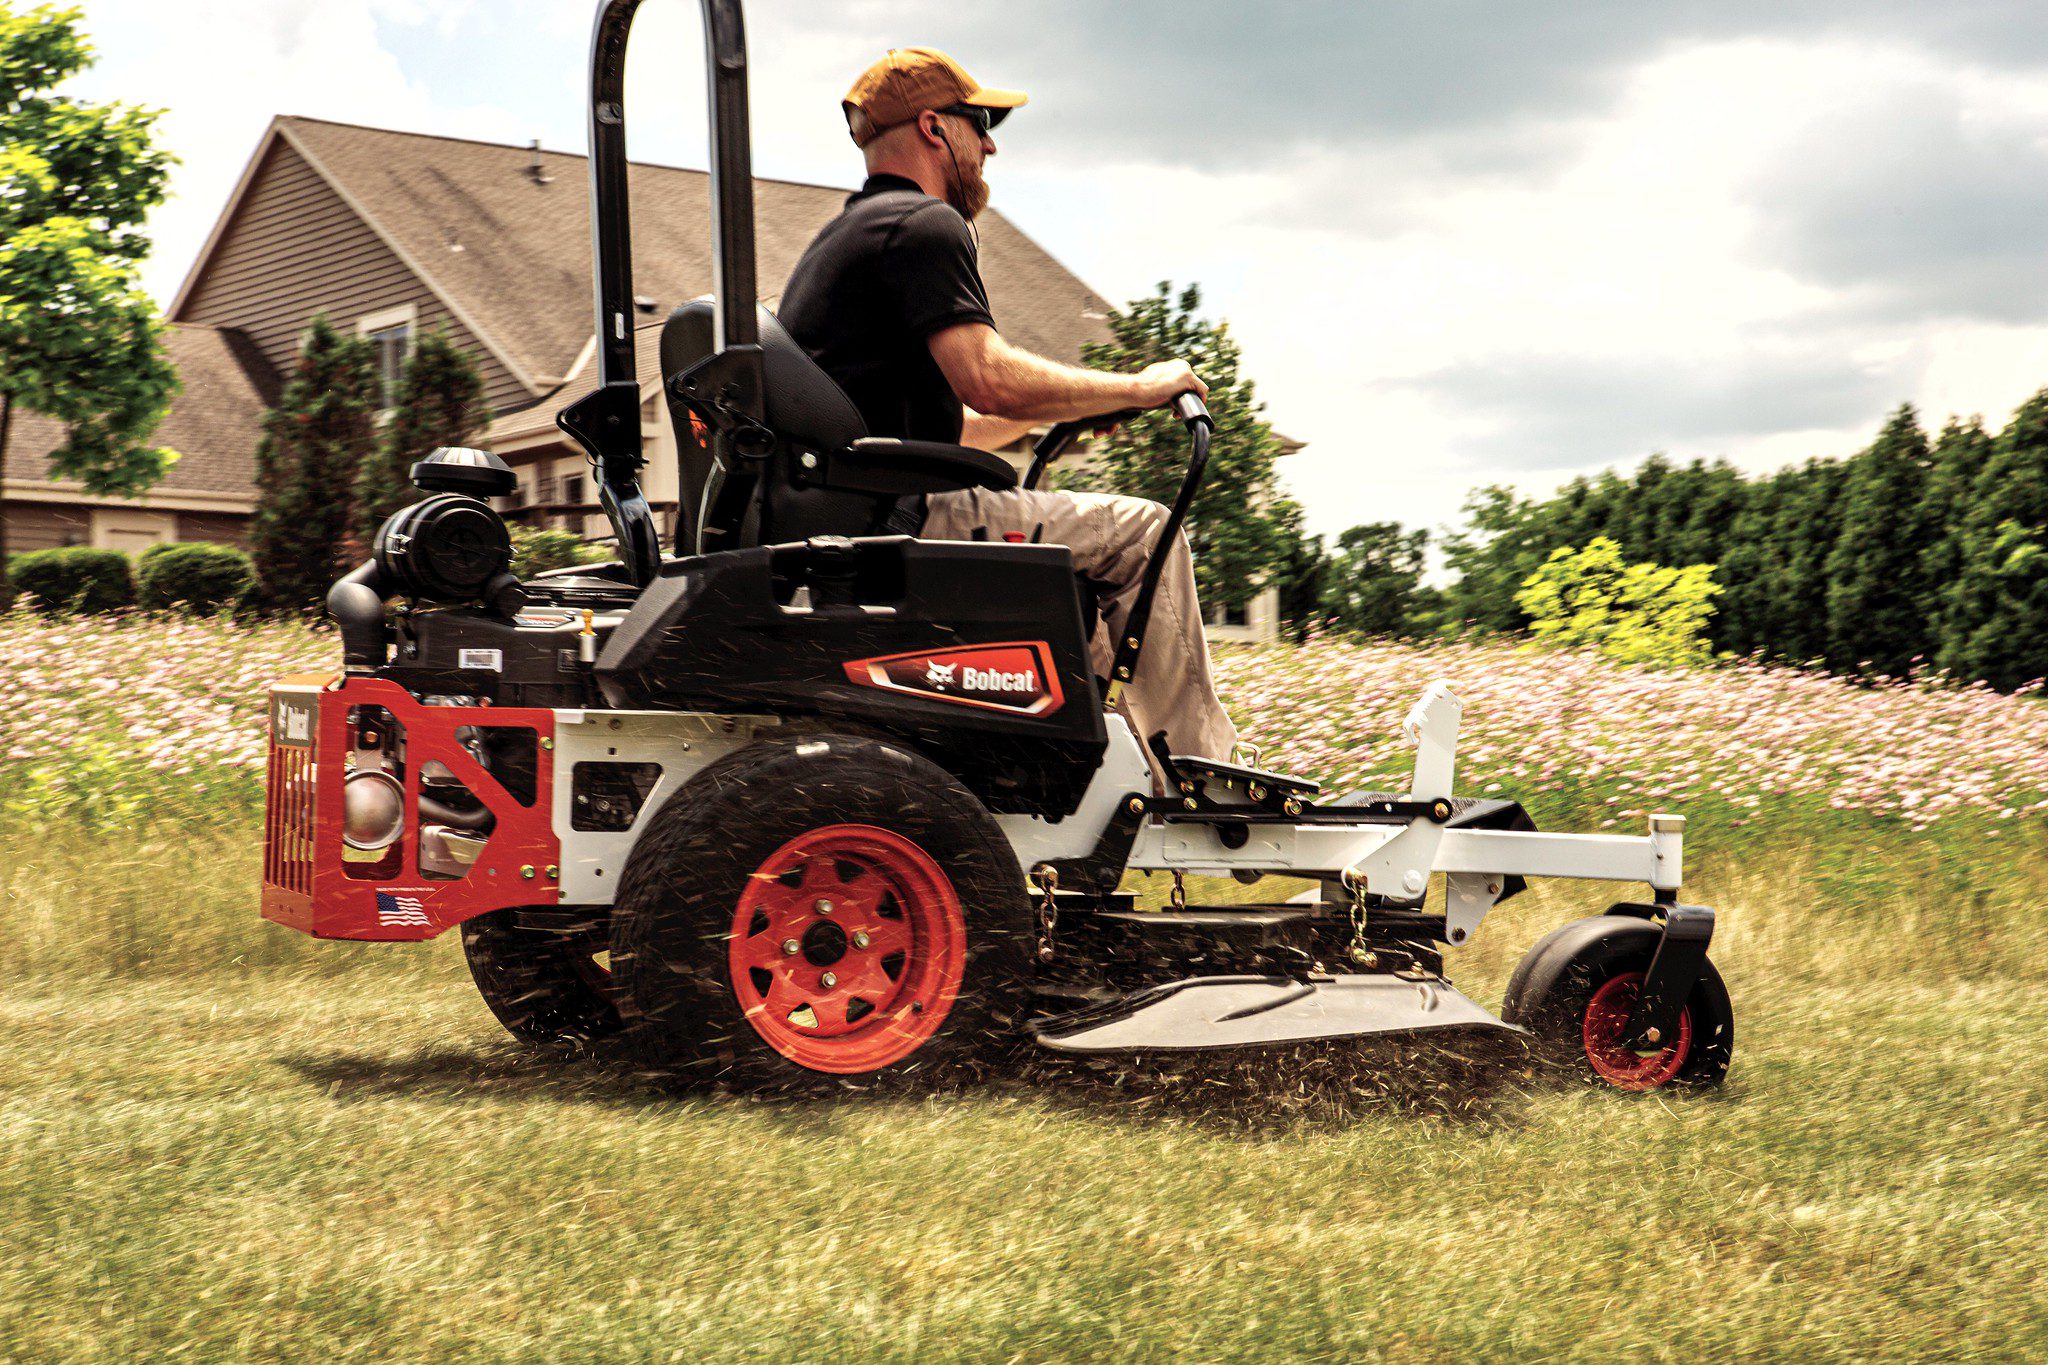 Browse Specs and more for the ZT3500 Zero-Turn Mower 52″ - Bobcat of the Rockies